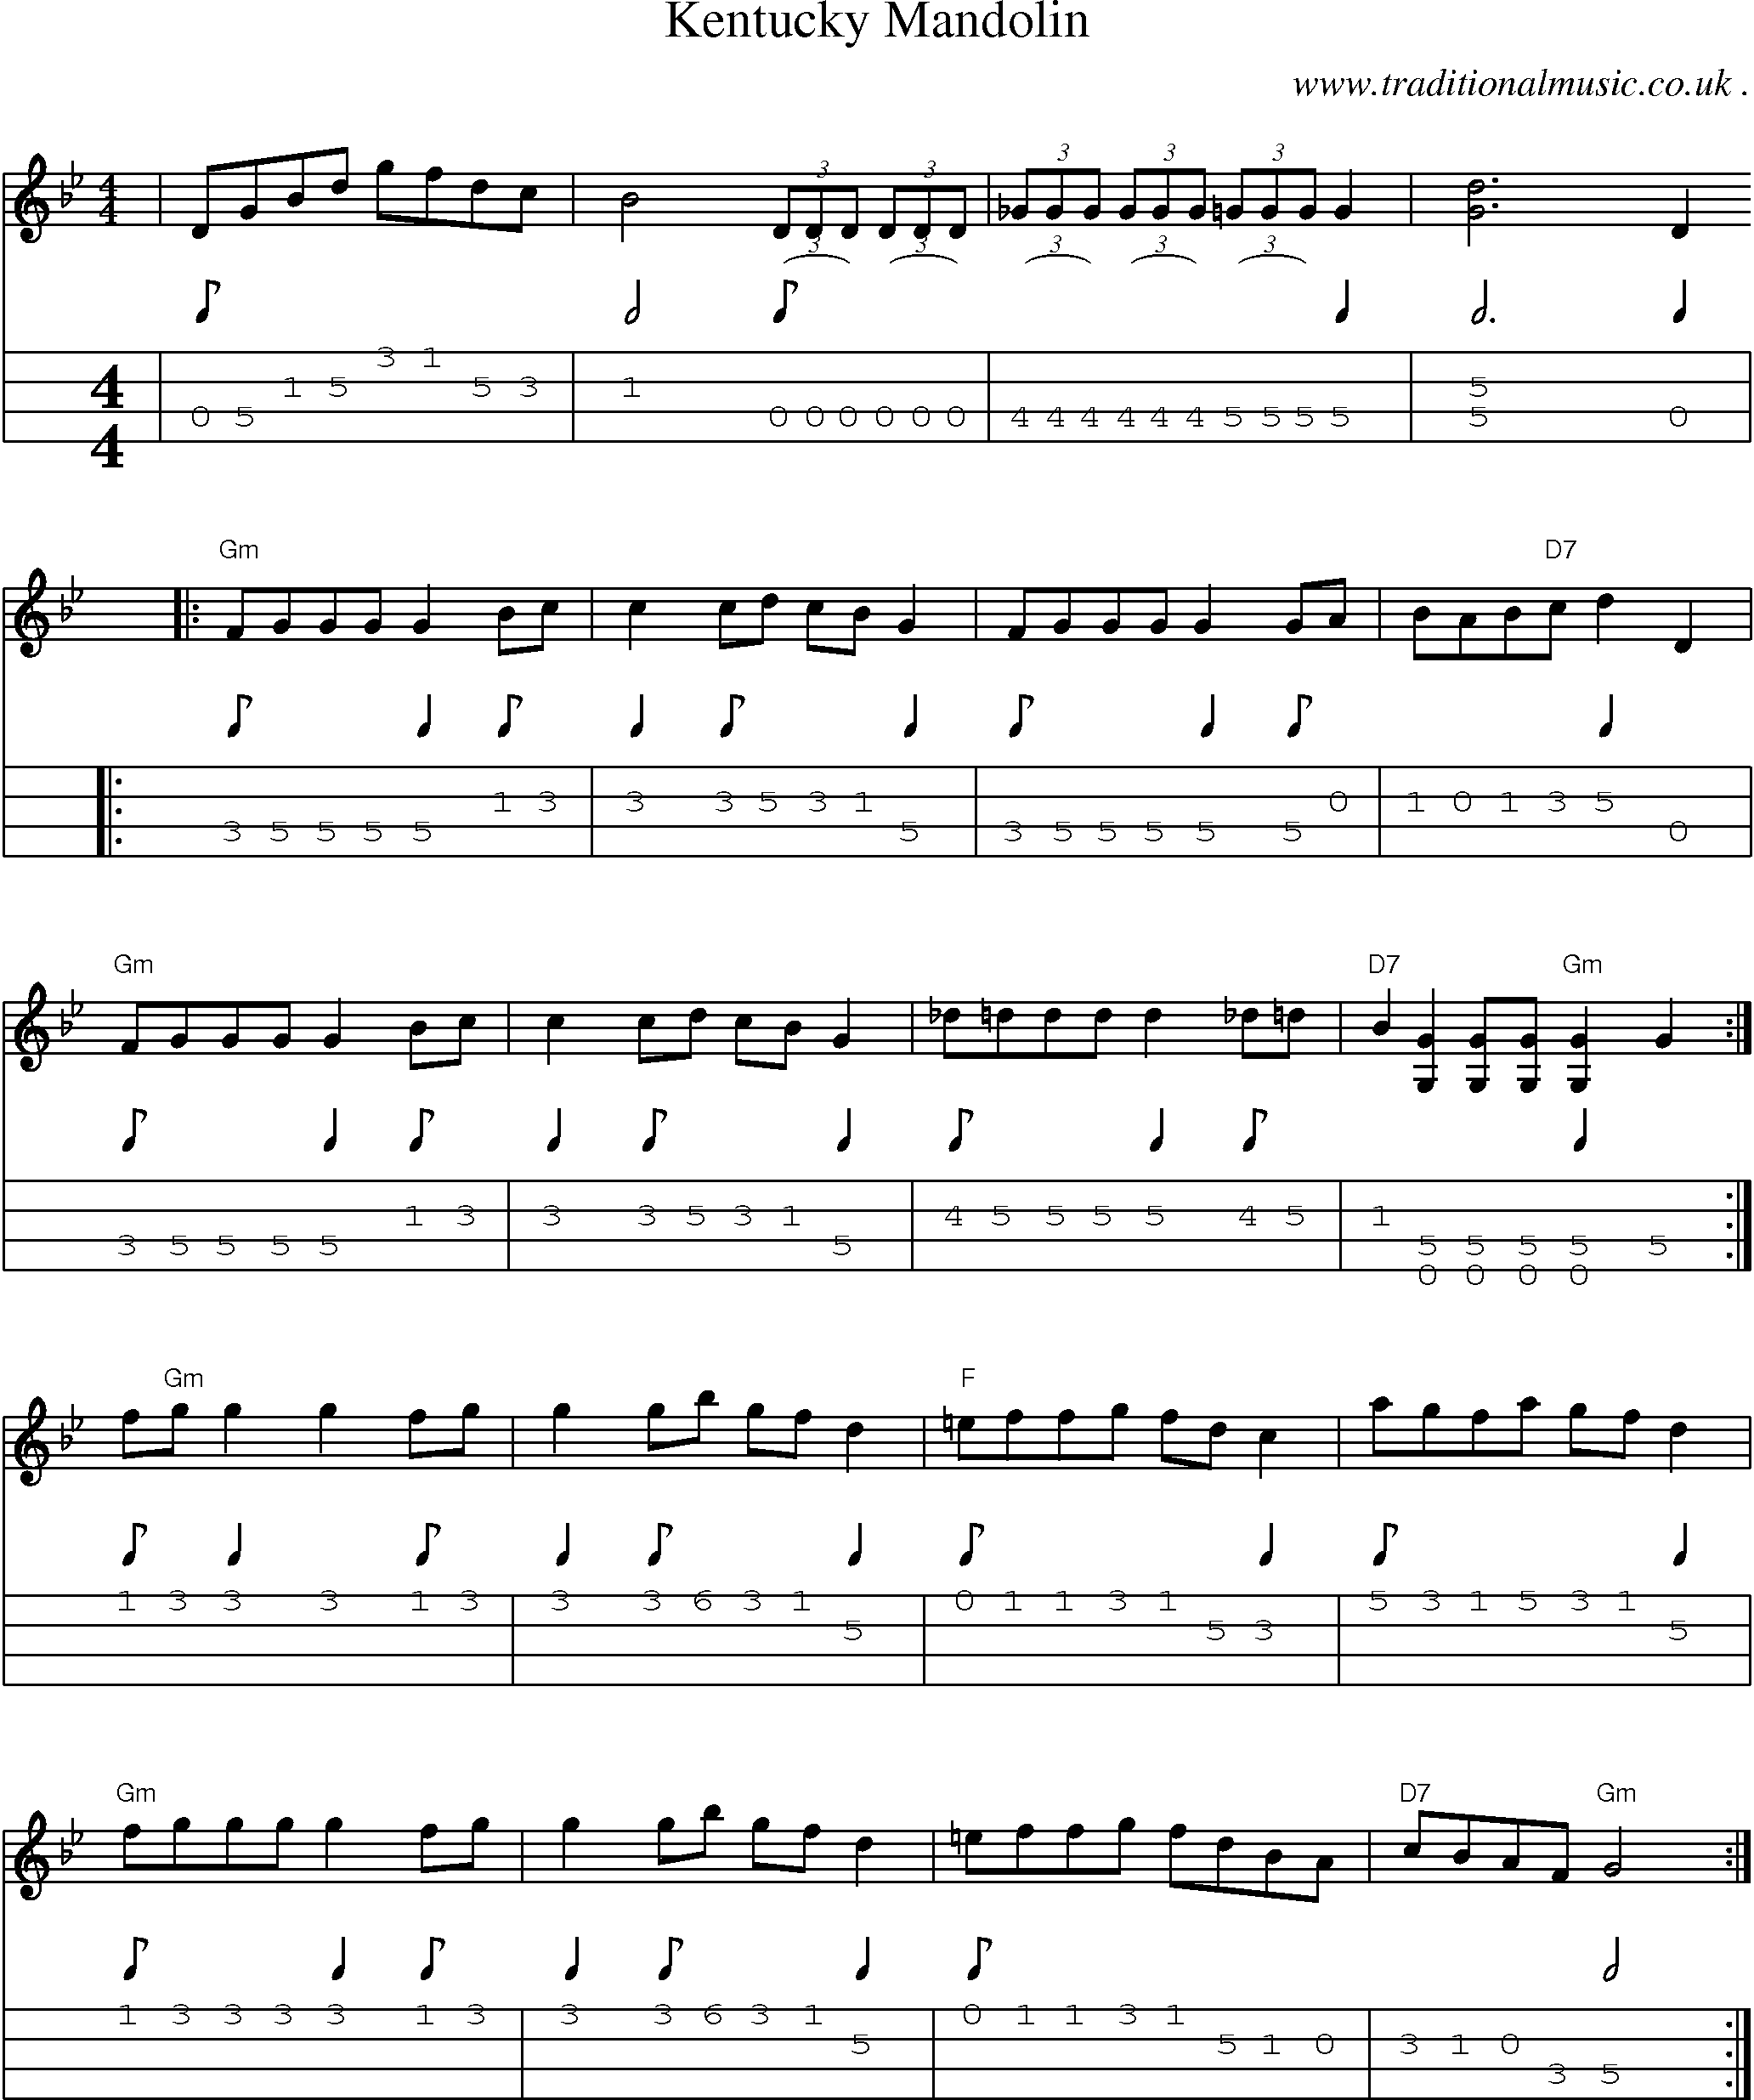 Music Score and Guitar Tabs for Kentucky Mandolin